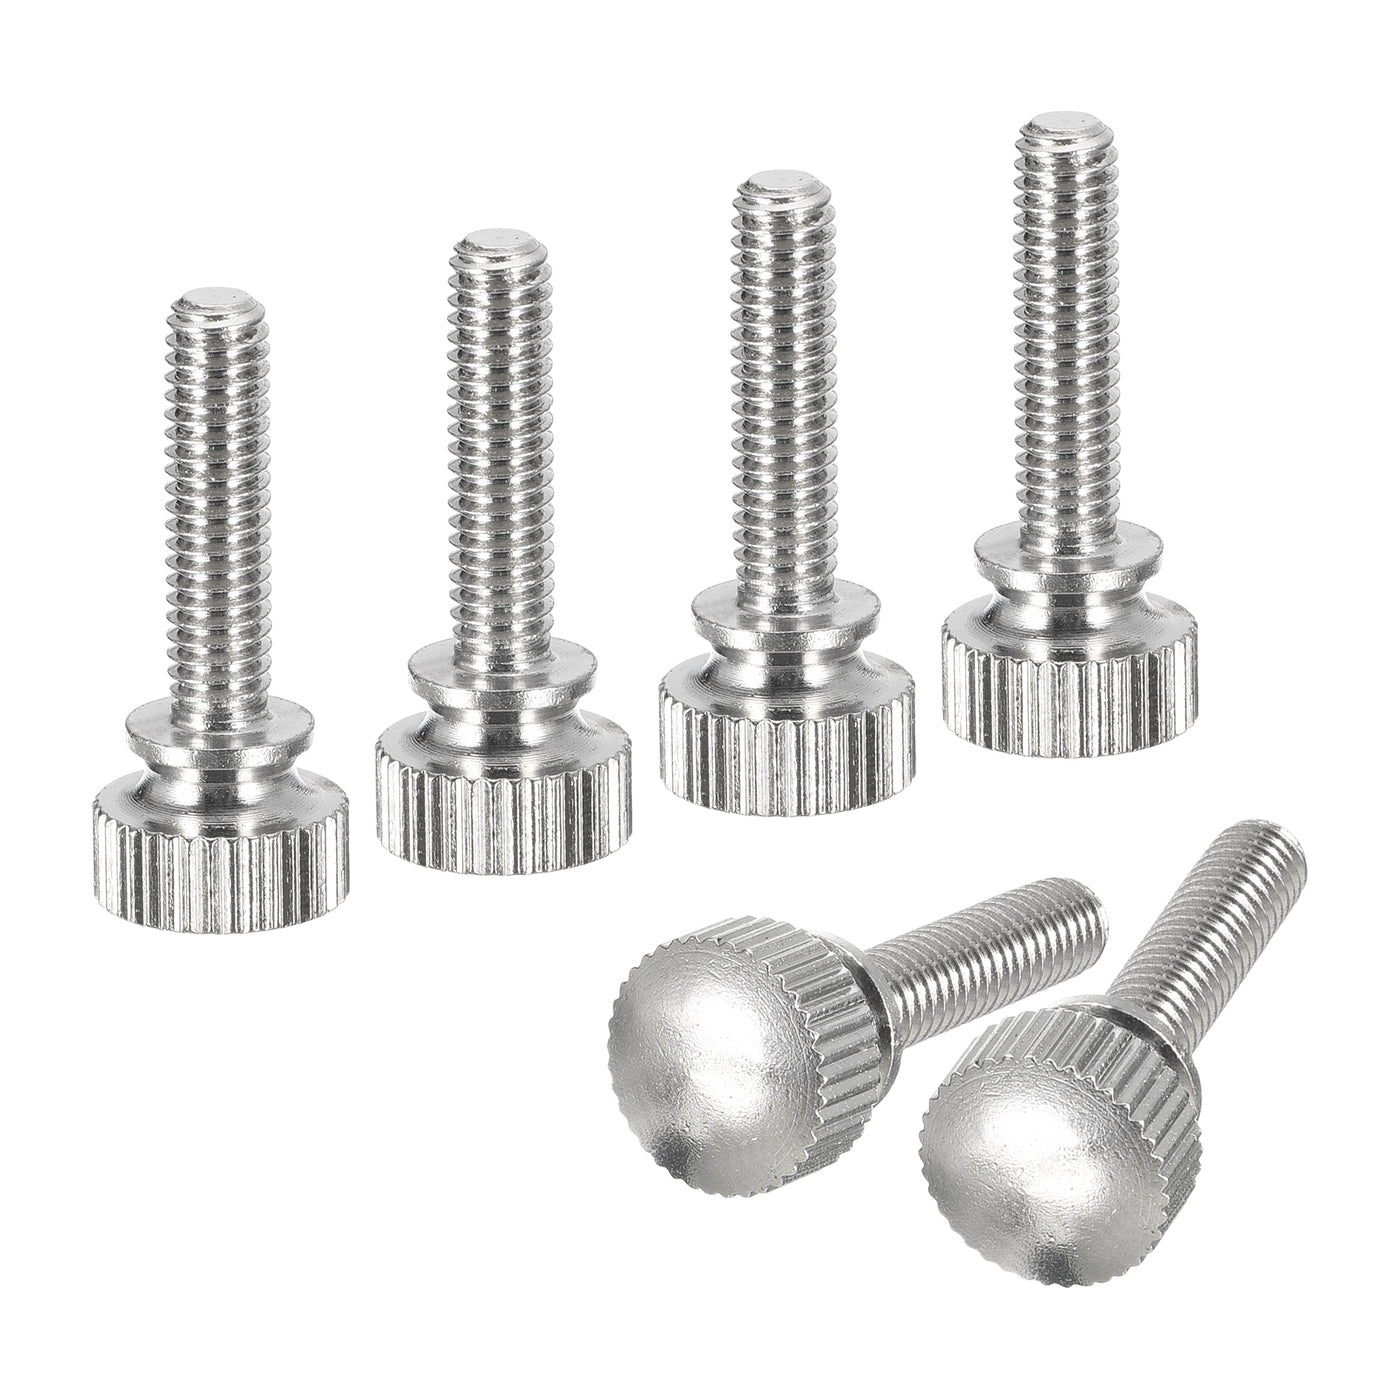 uxcell Uxcell M4x16mm Knurled Thumb Screws, 6pcs Brass Thumb Screws with Shoulder, Silver Tone